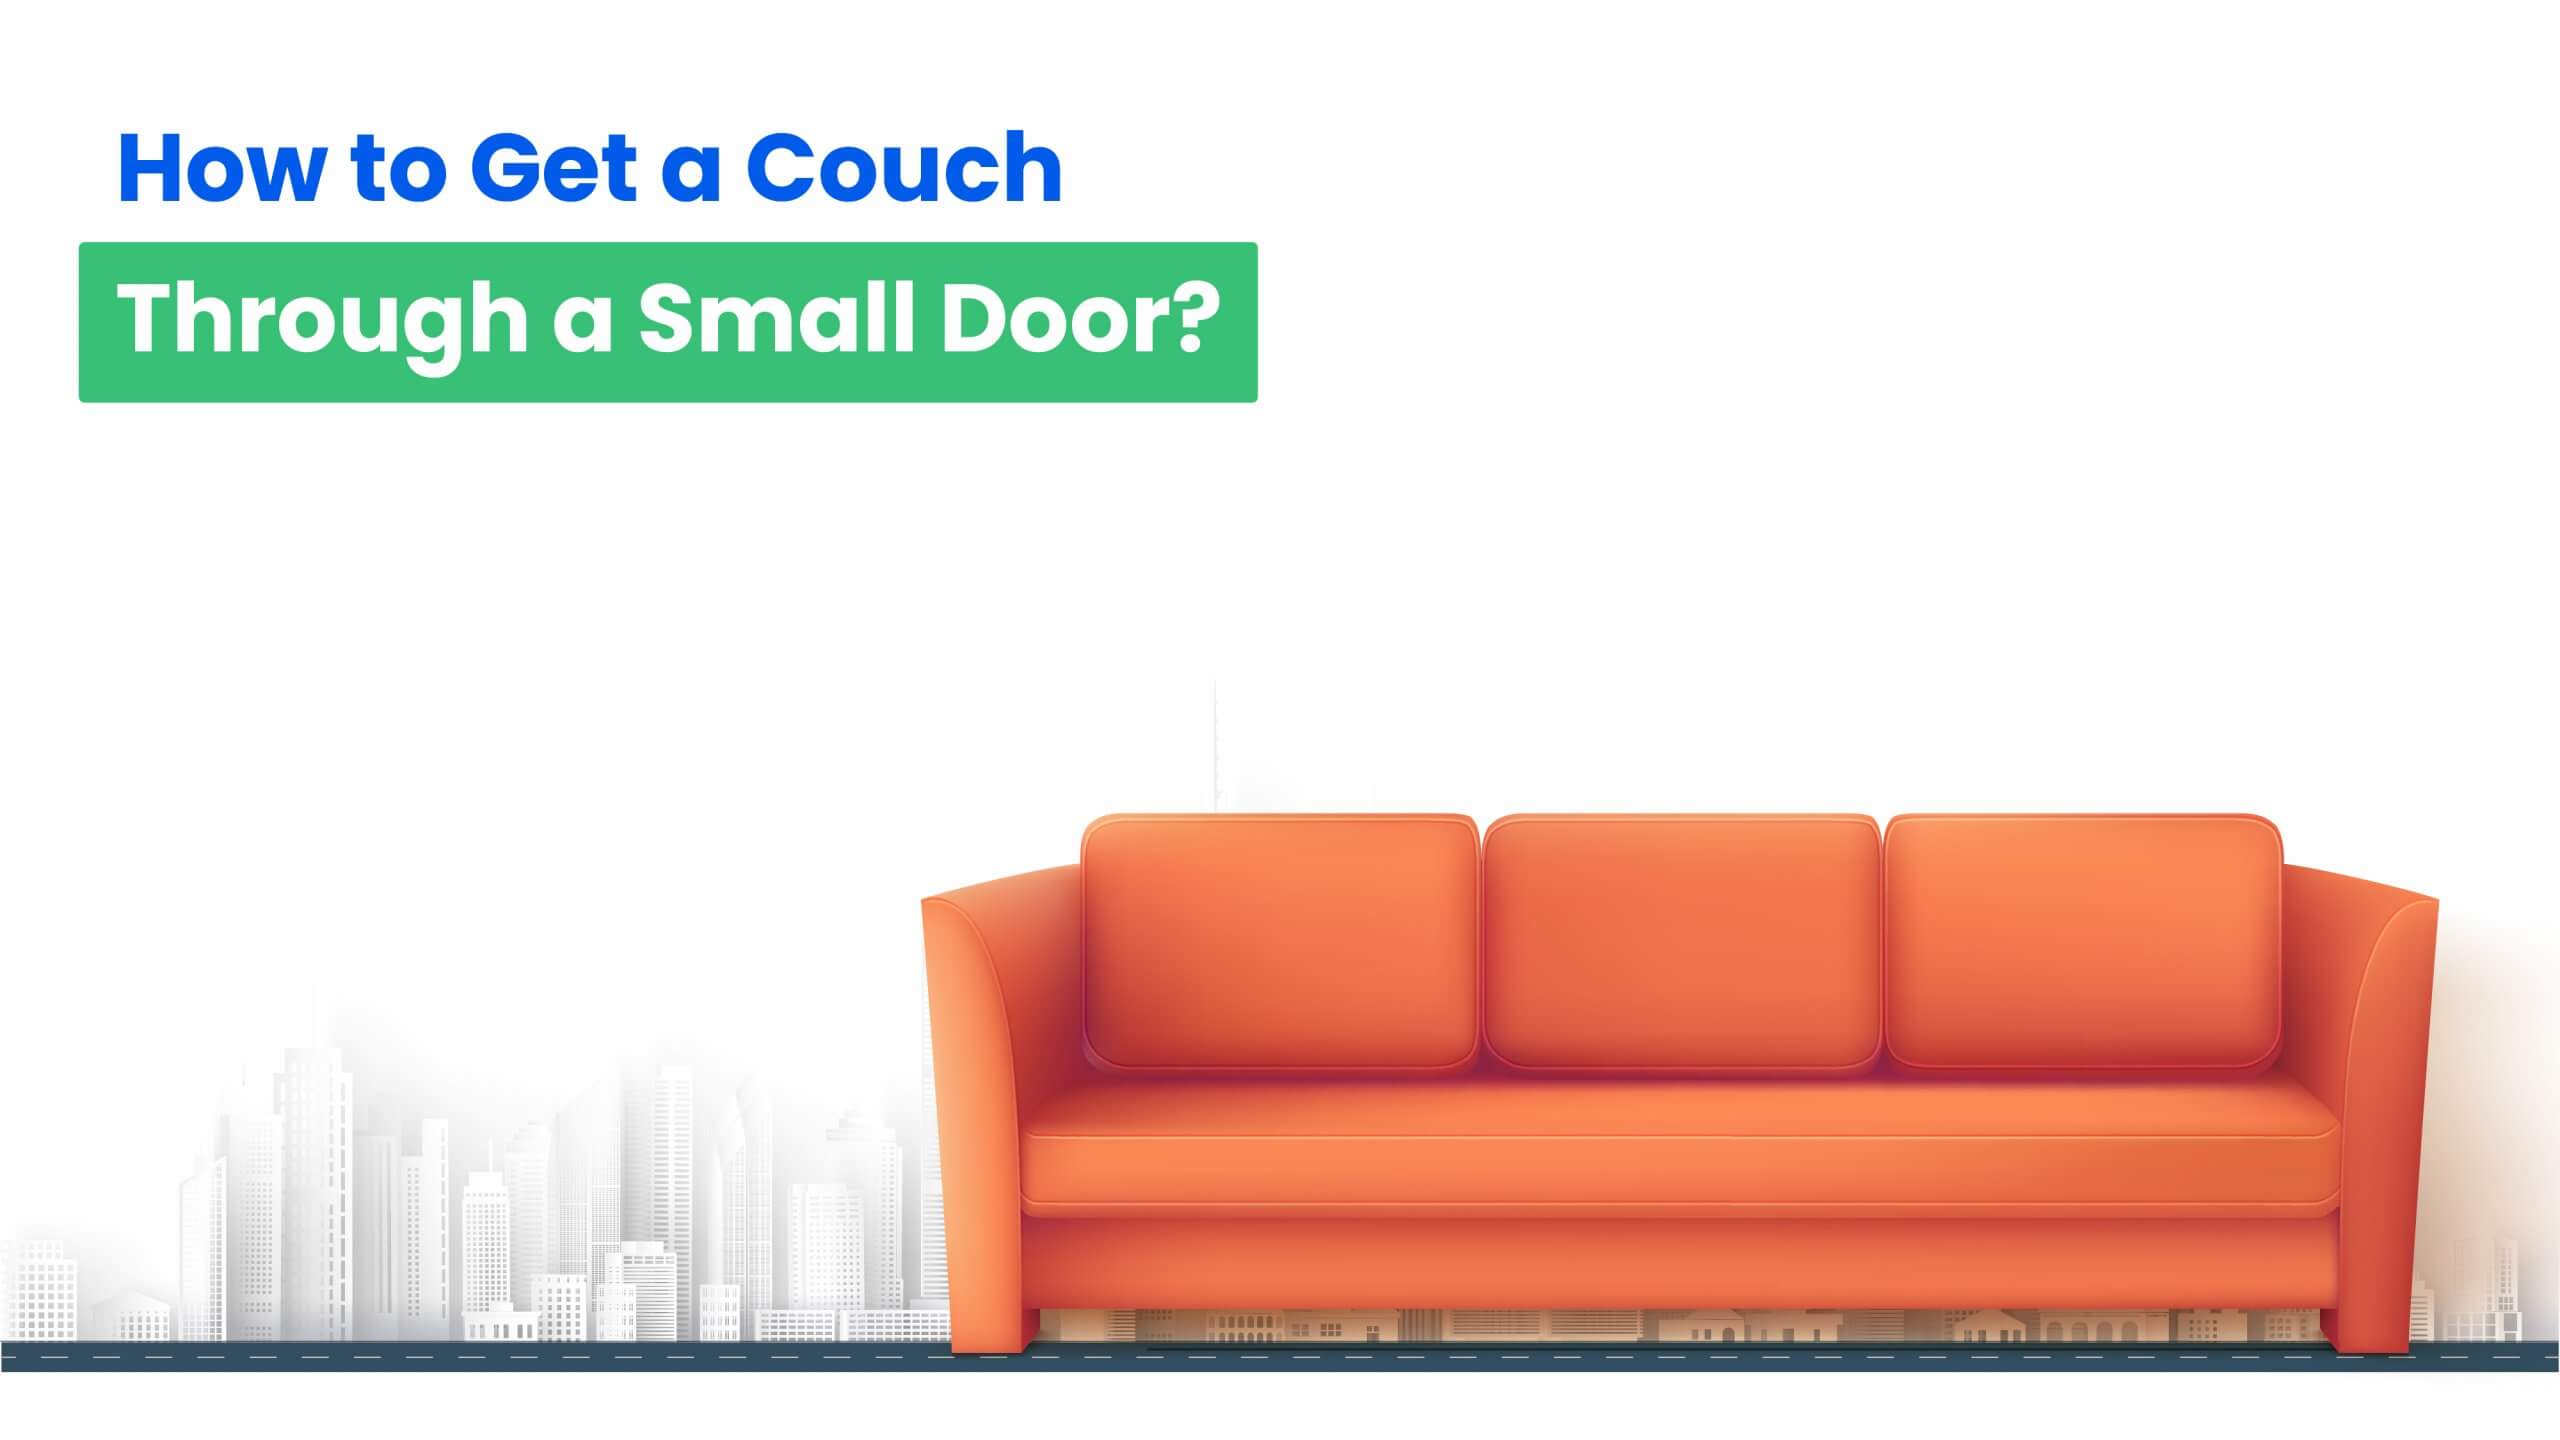 How to Get a Couch Through a Small Door